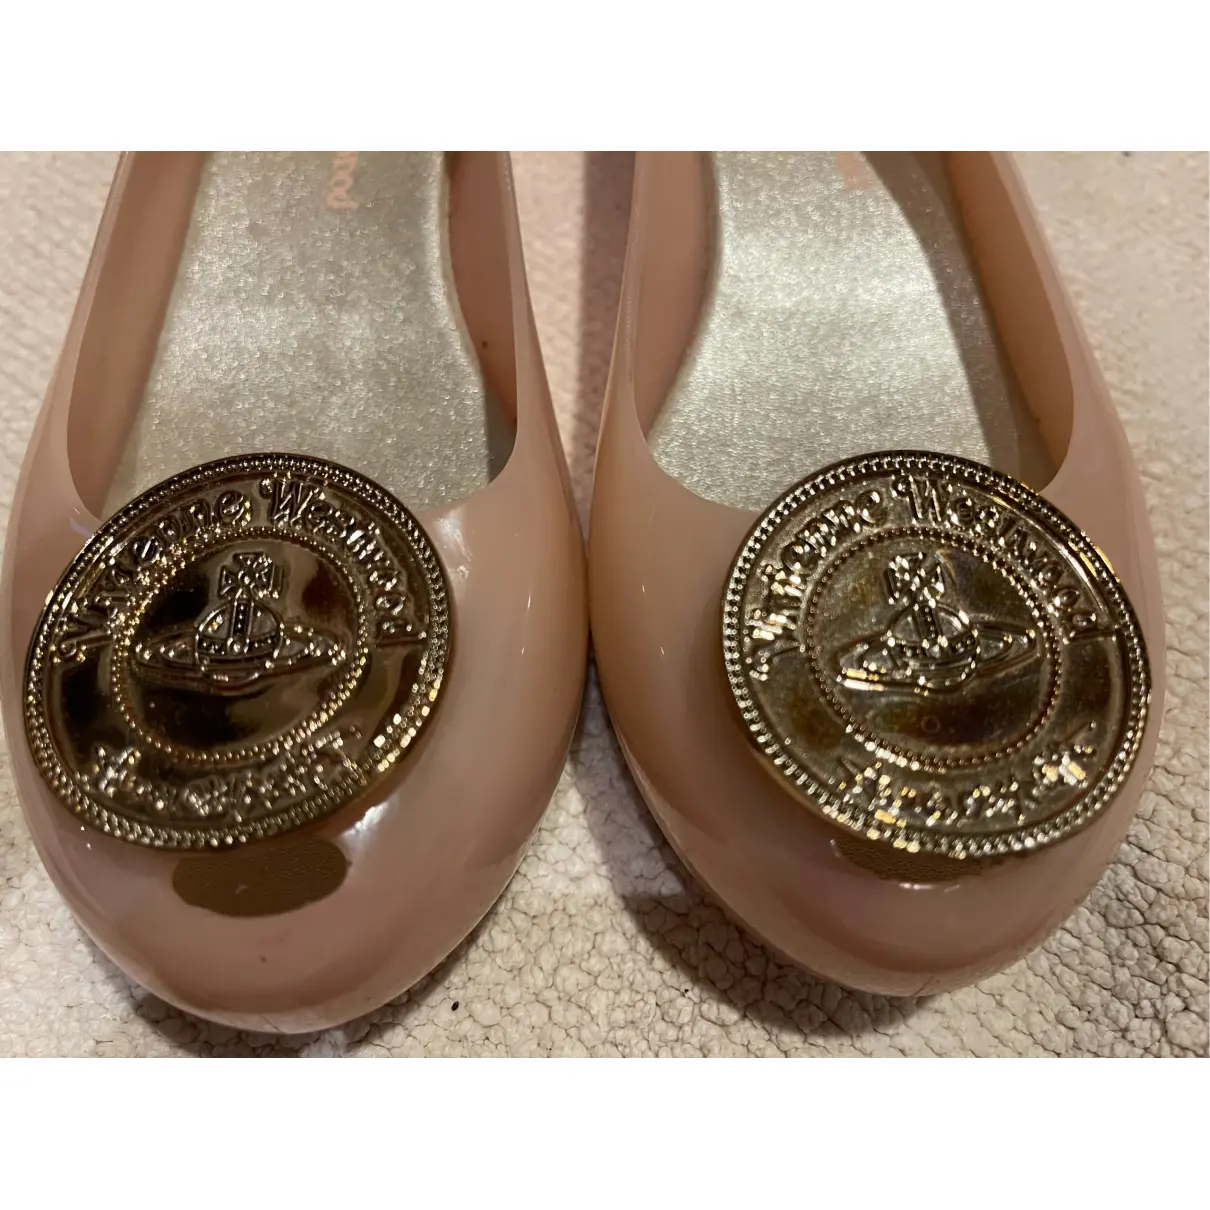 Buy Vivienne Westwood Anglomania Ballet flats online